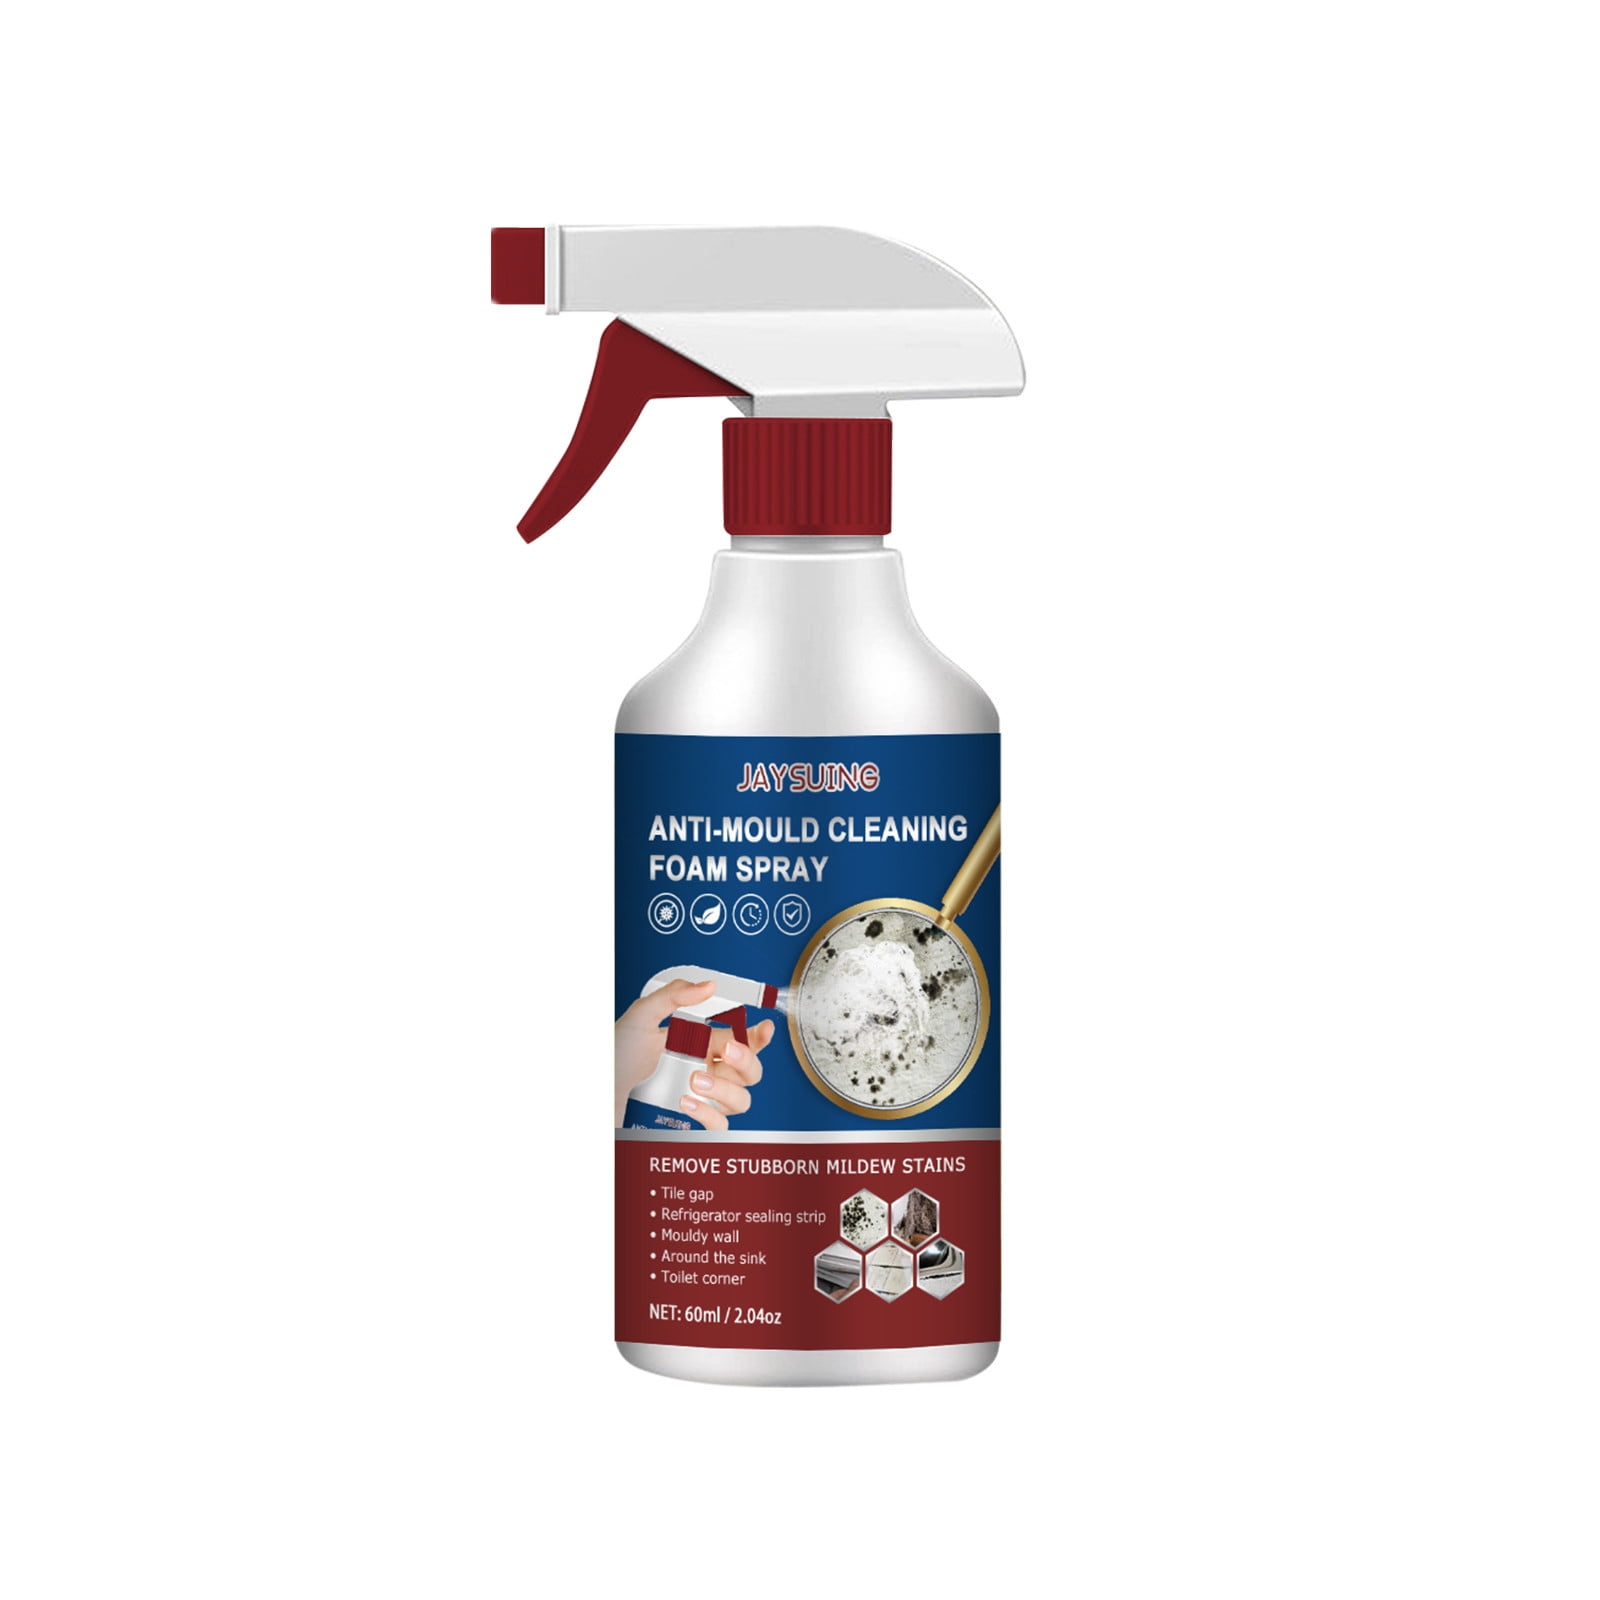 Household Mold Mildew Remover Spray,Mould Cleaner, Anti-mould